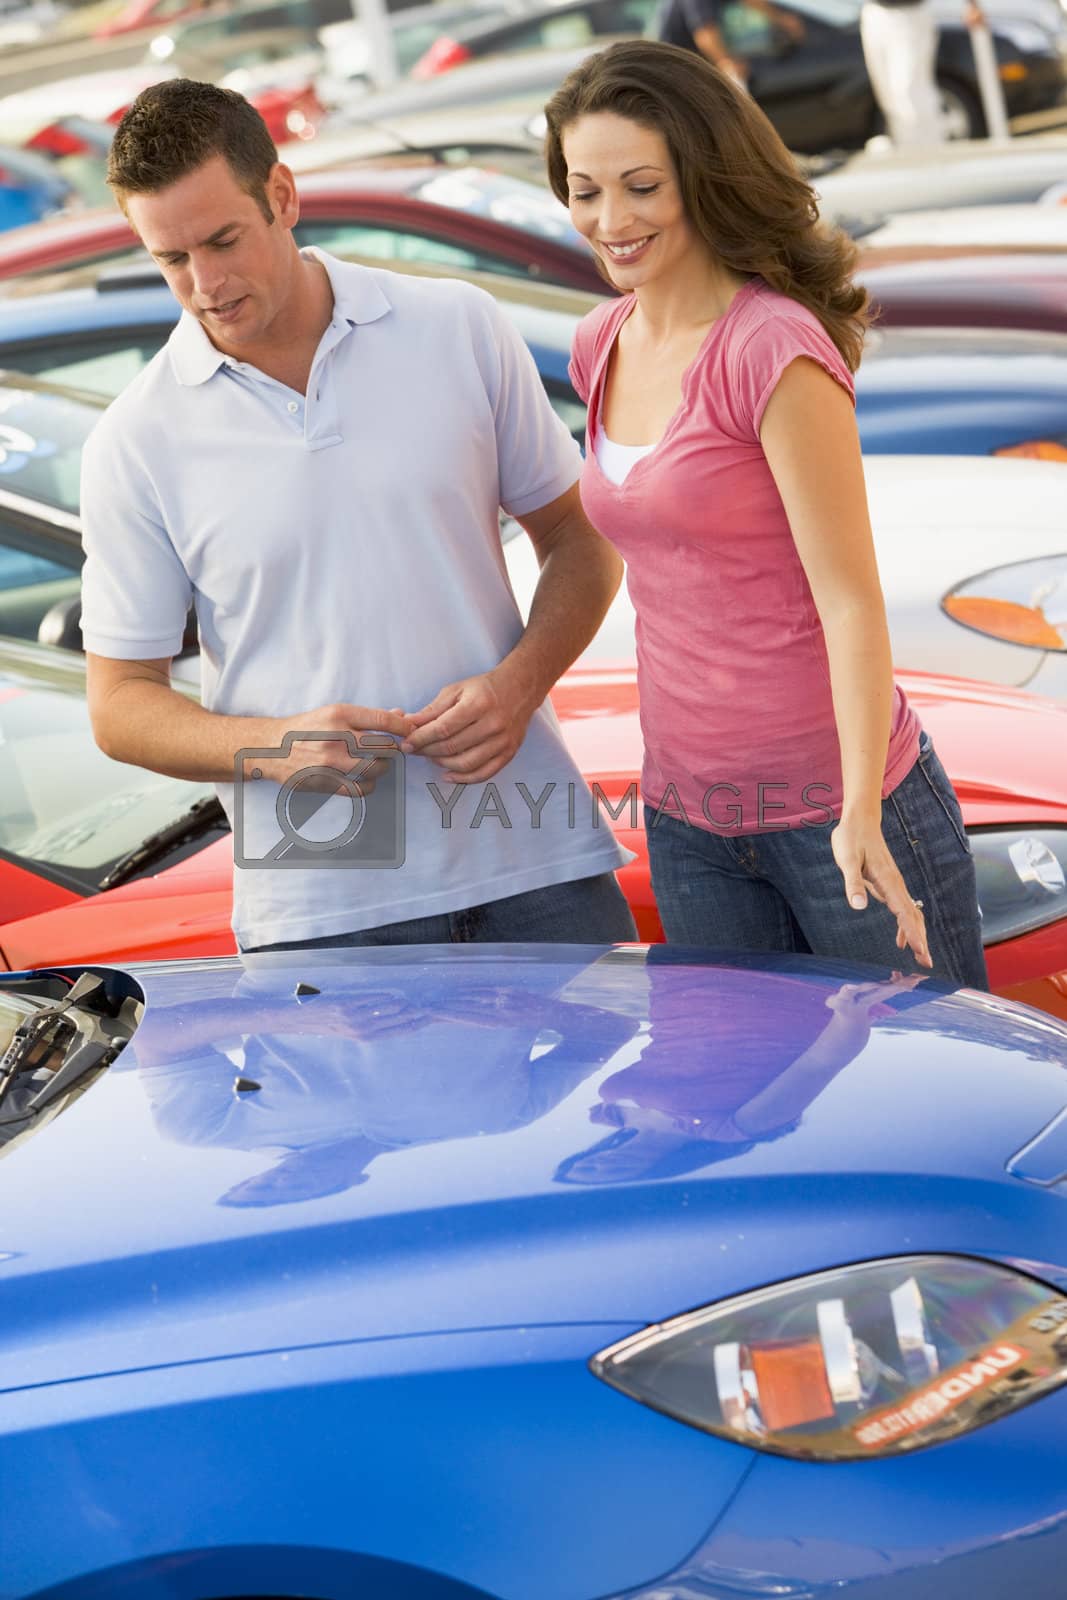 Royalty free image of Couple looking at new cars by MonkeyBusiness